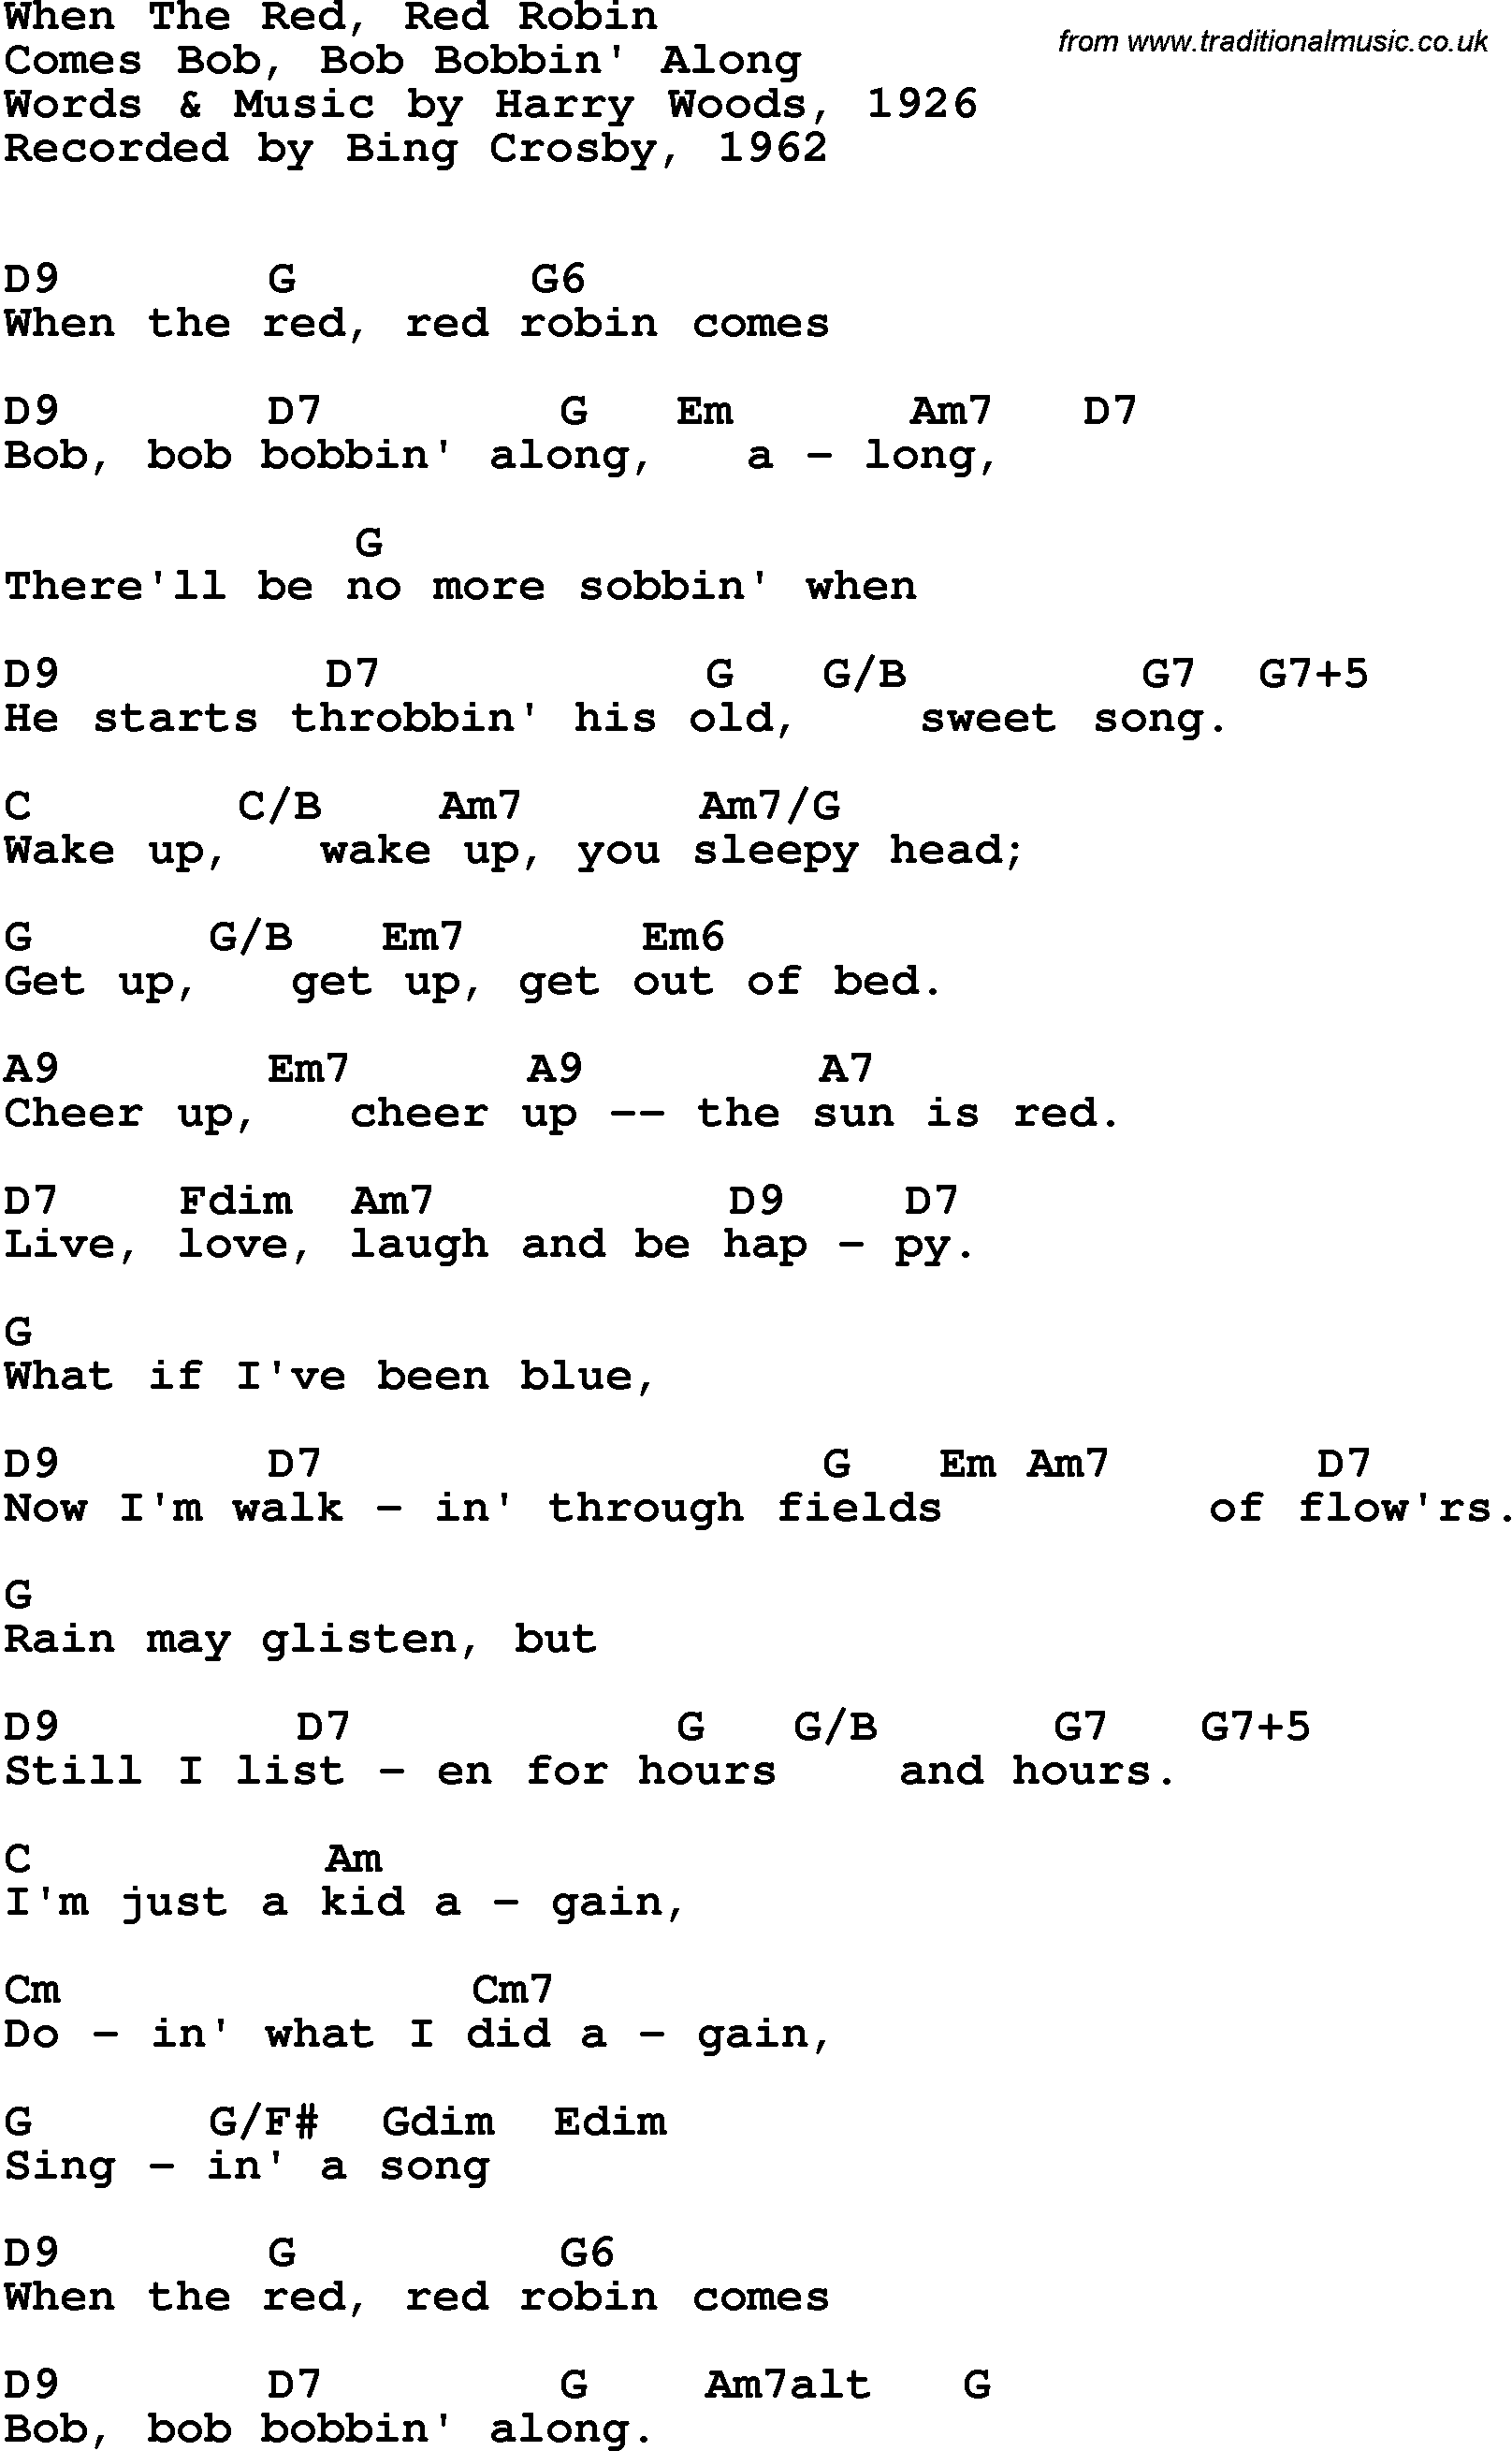 Song Lyrics with guitar chords for When The Red, Red Robin - Bing Crosby, 1962